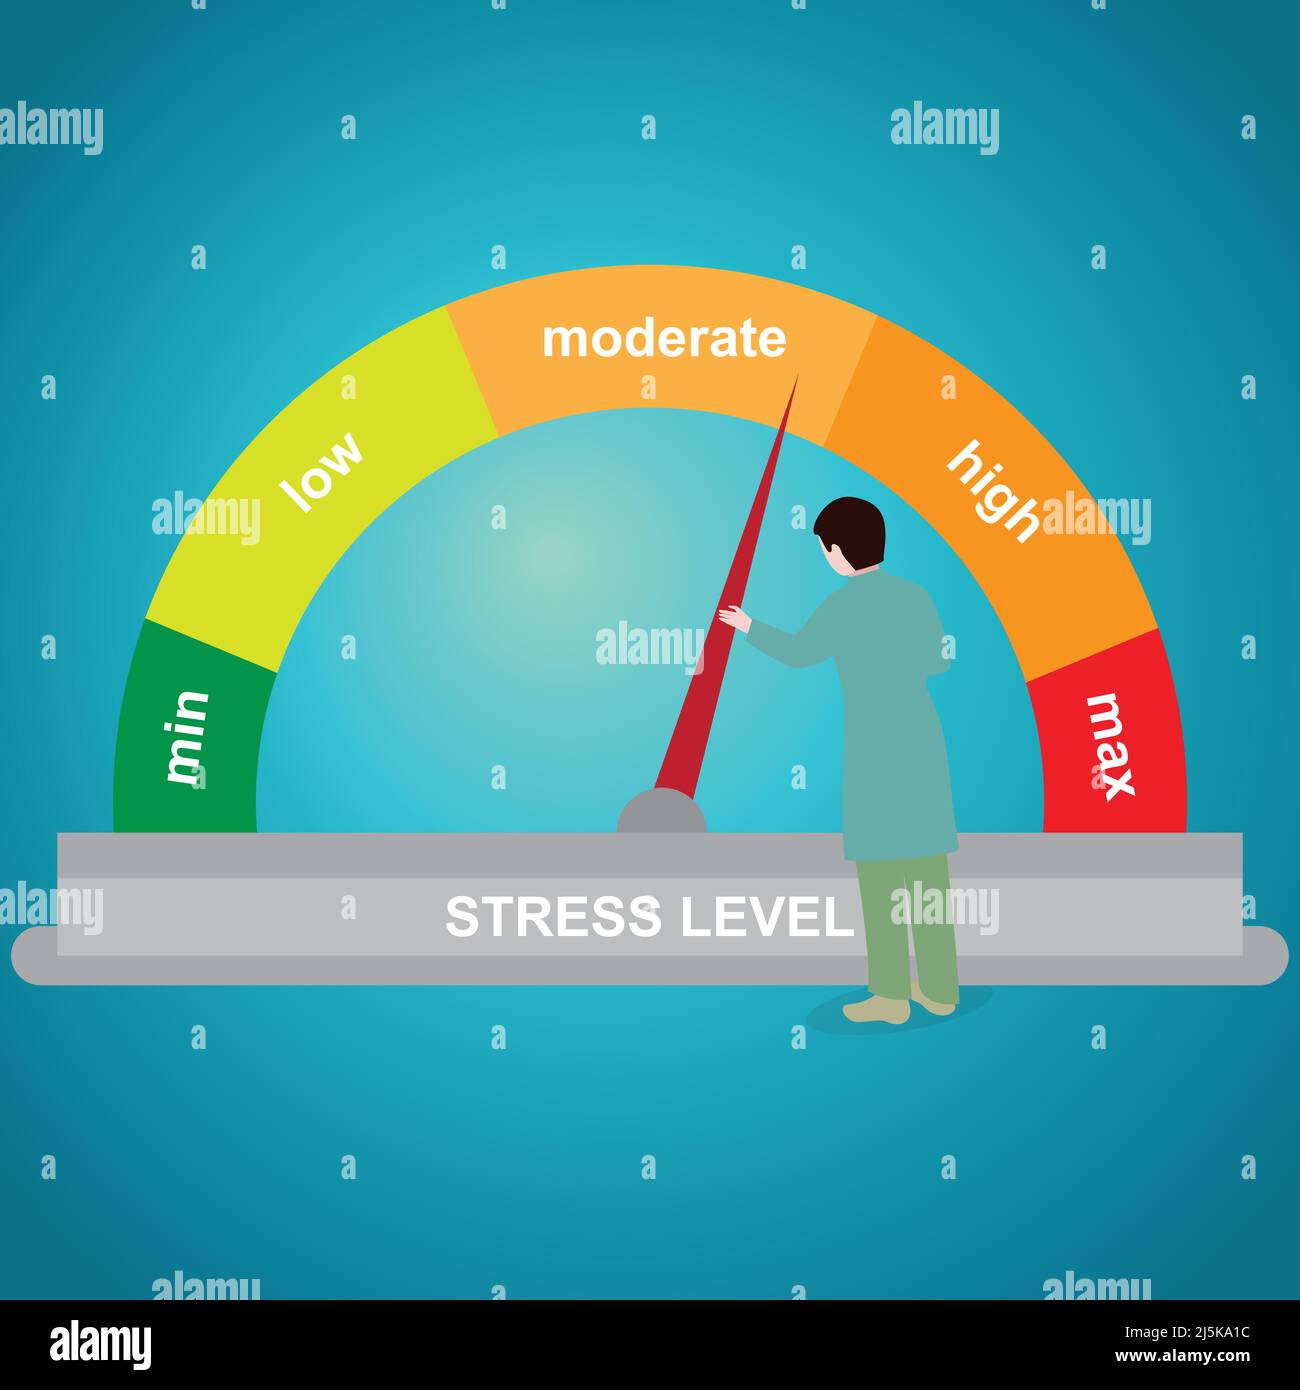 Person reducing the stress level to moderate on a stress scale Stock Vector